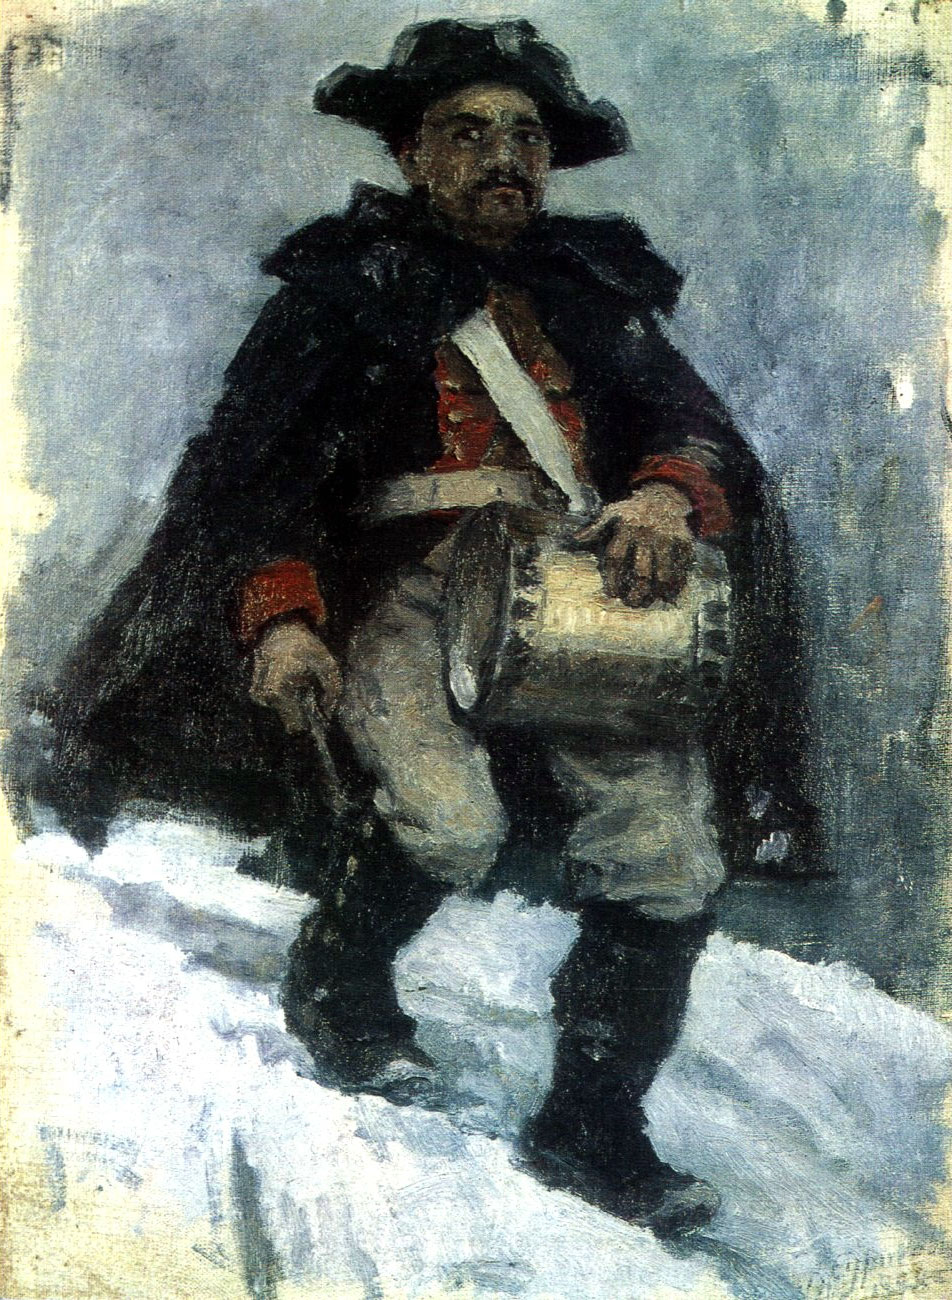 Soldier with drum (1898).